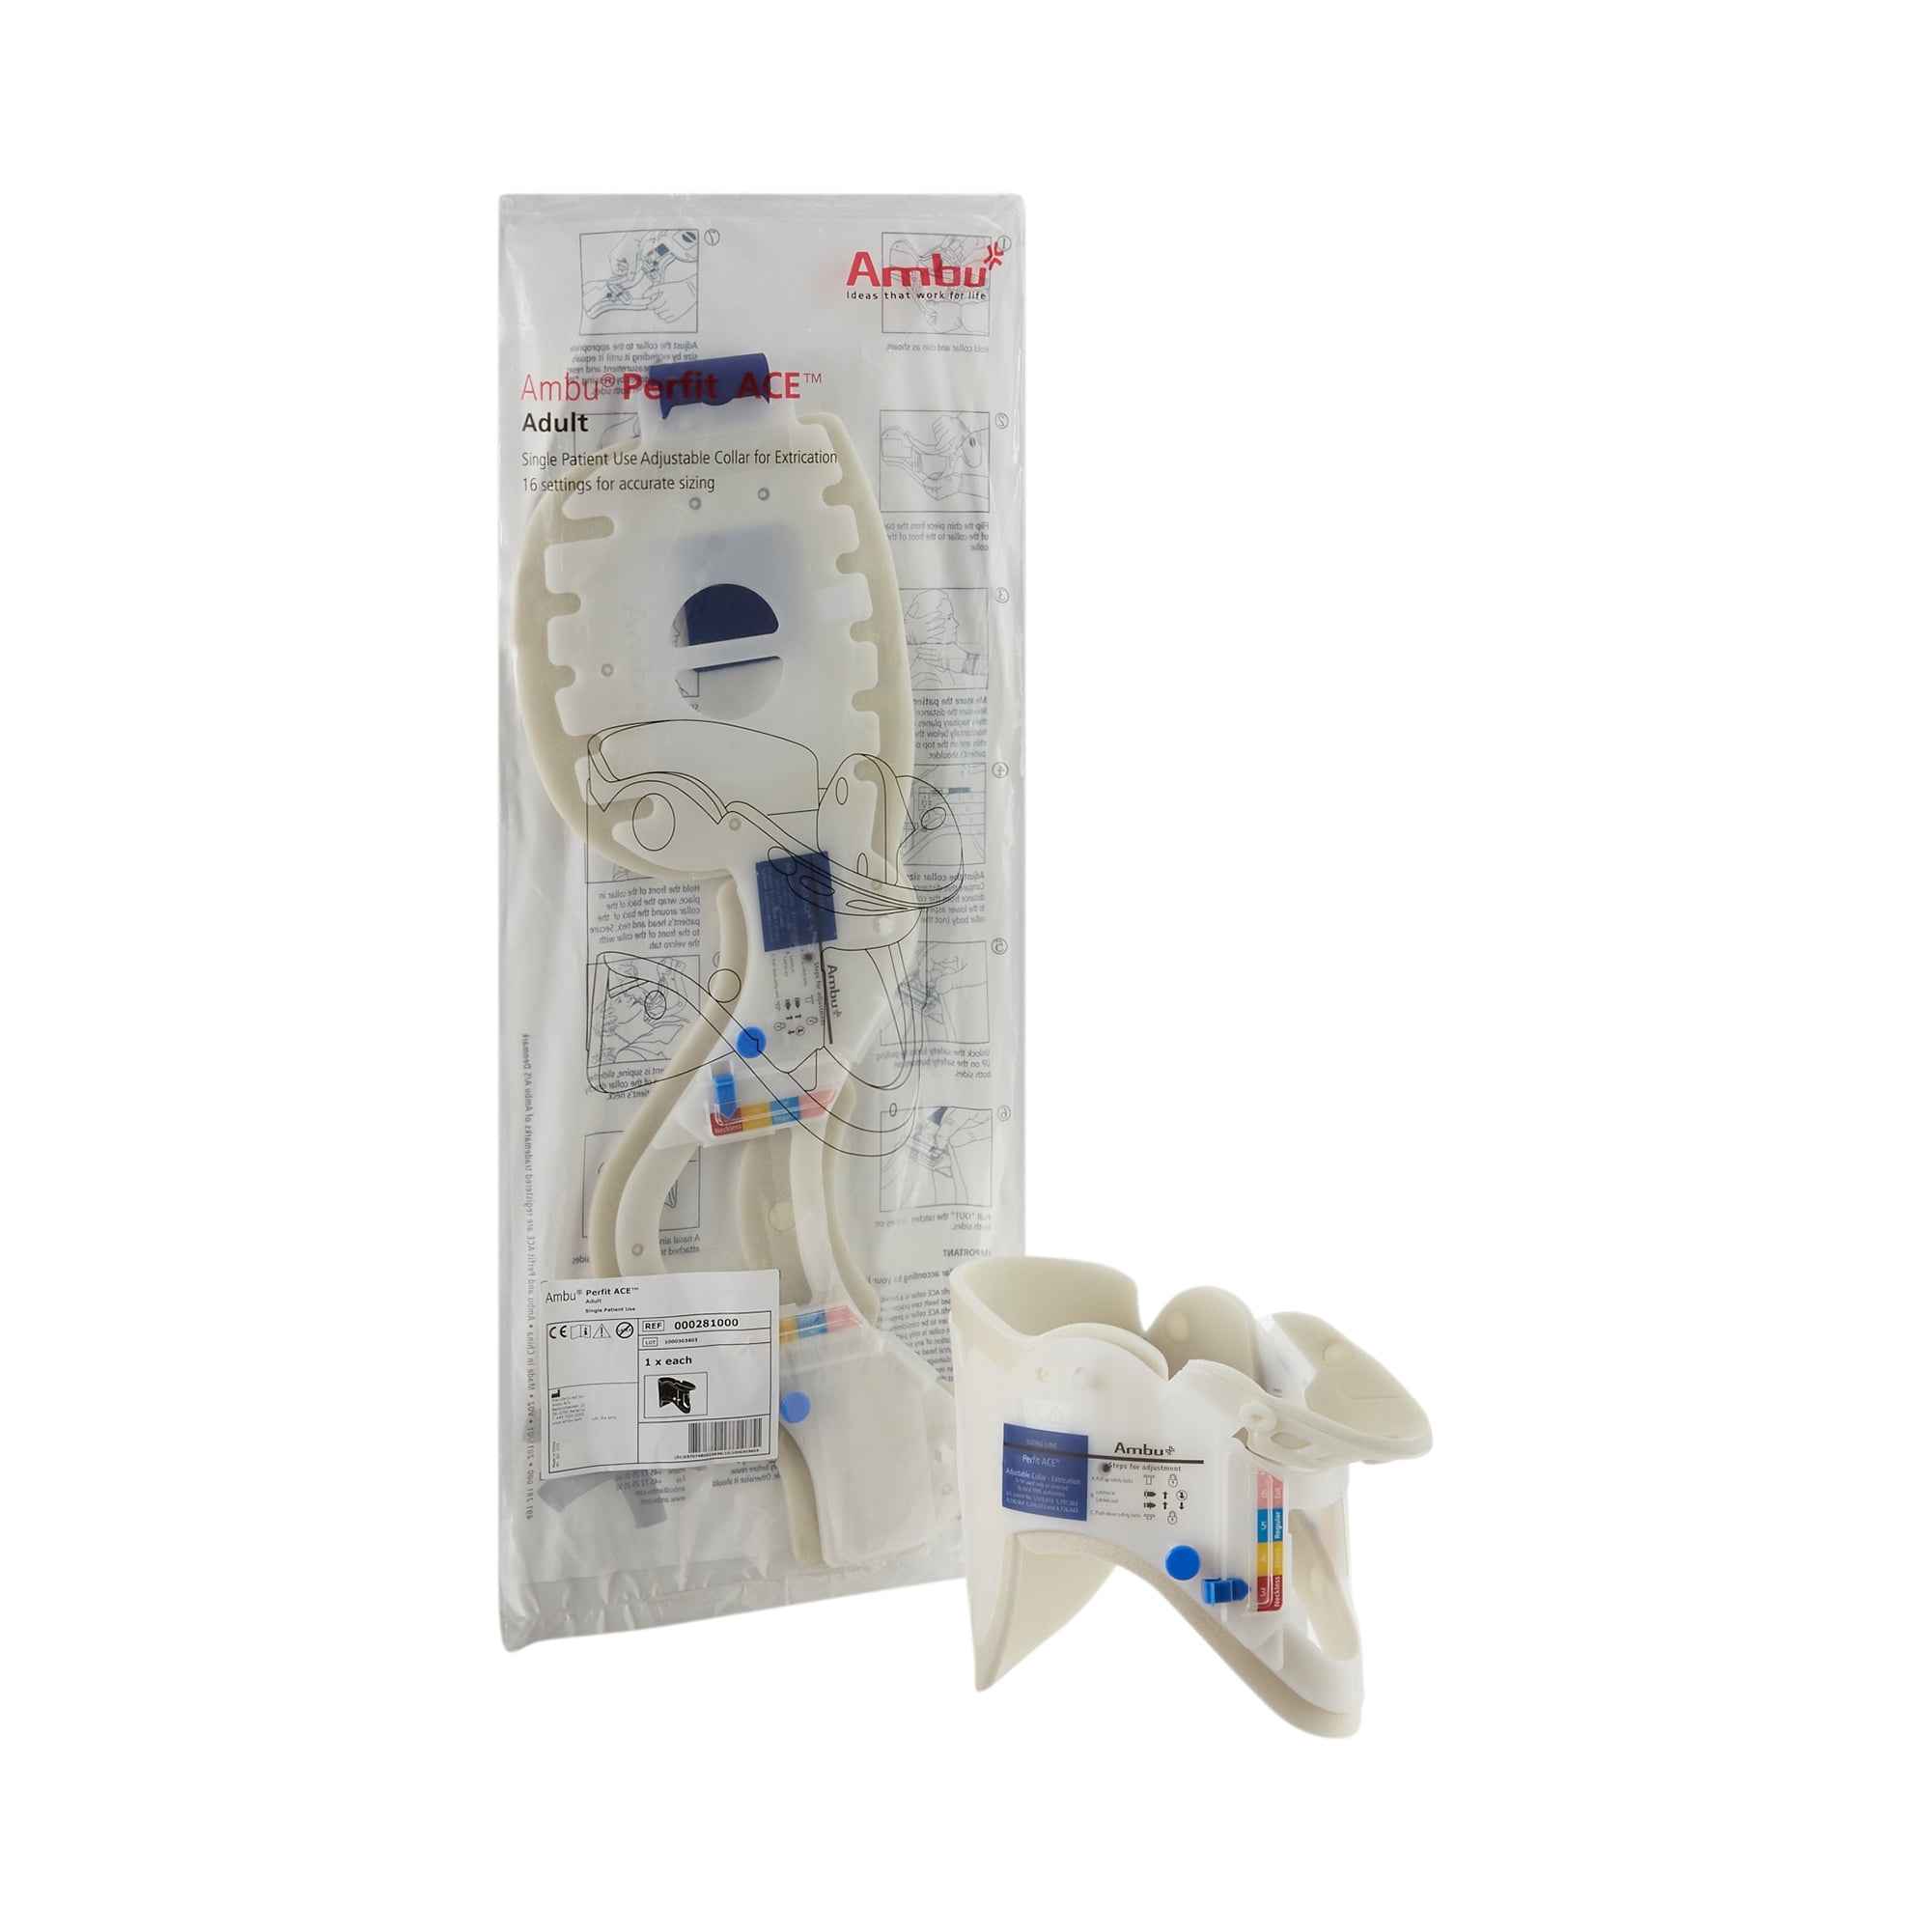 Circumference Size Extrication 000281000 ACE Neck Ambu Cervical Perfit Collar Adjustable Preformed One